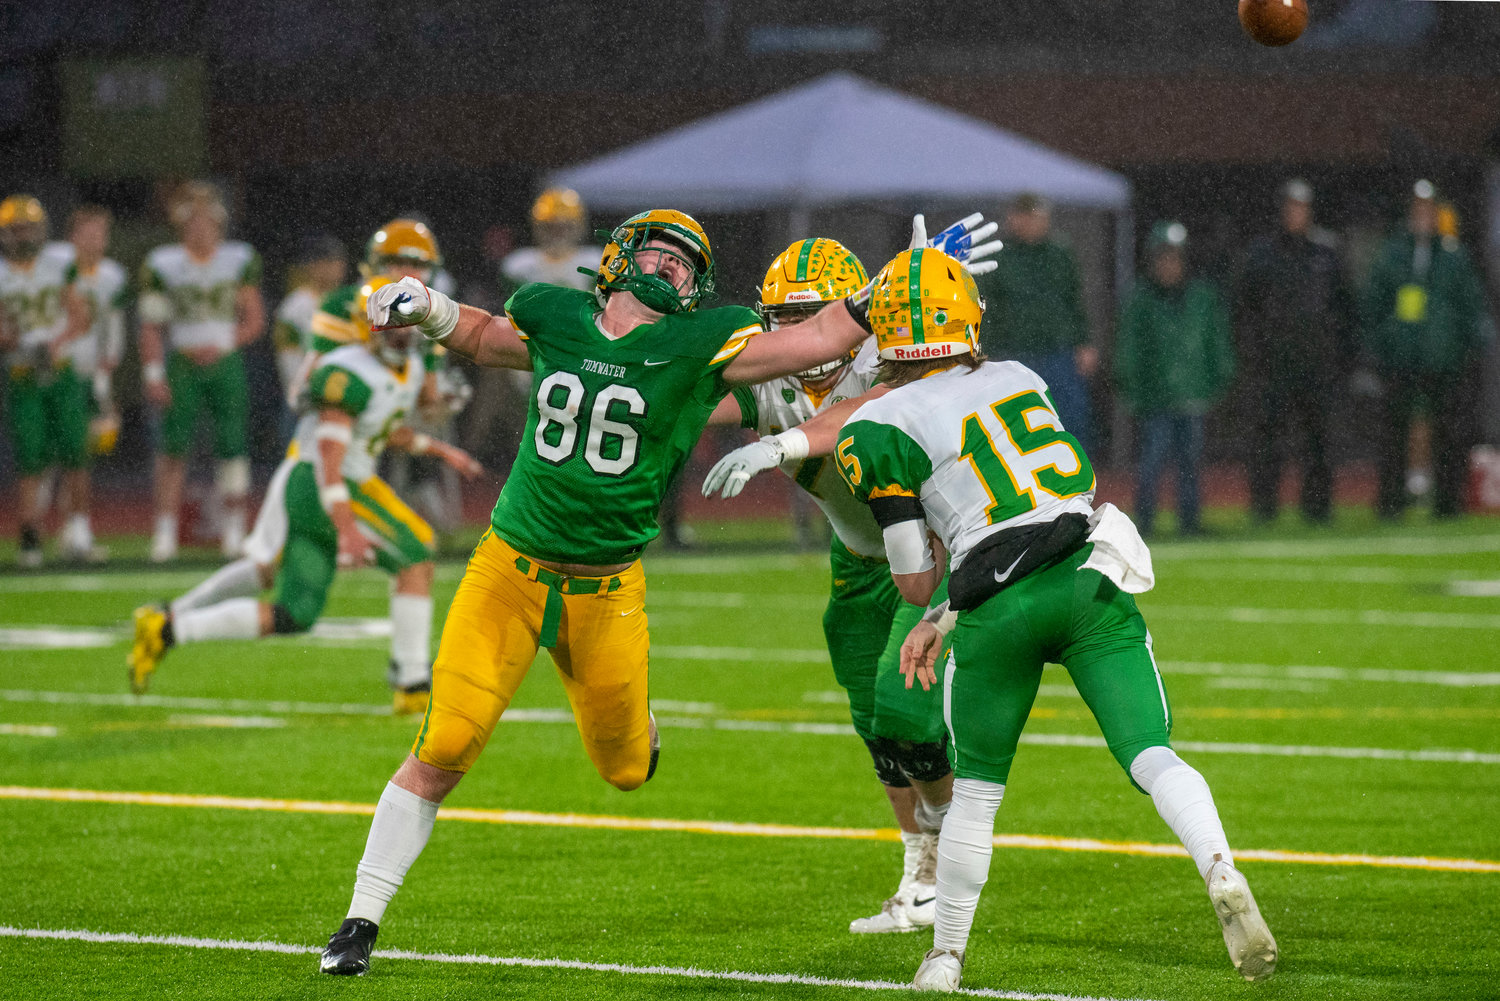 Tumwater’s Austin Terry (86) attempts to block a pass by Lynden’s Kaeden Hermanutz (15) during the 2A state title game on Dec. 4.